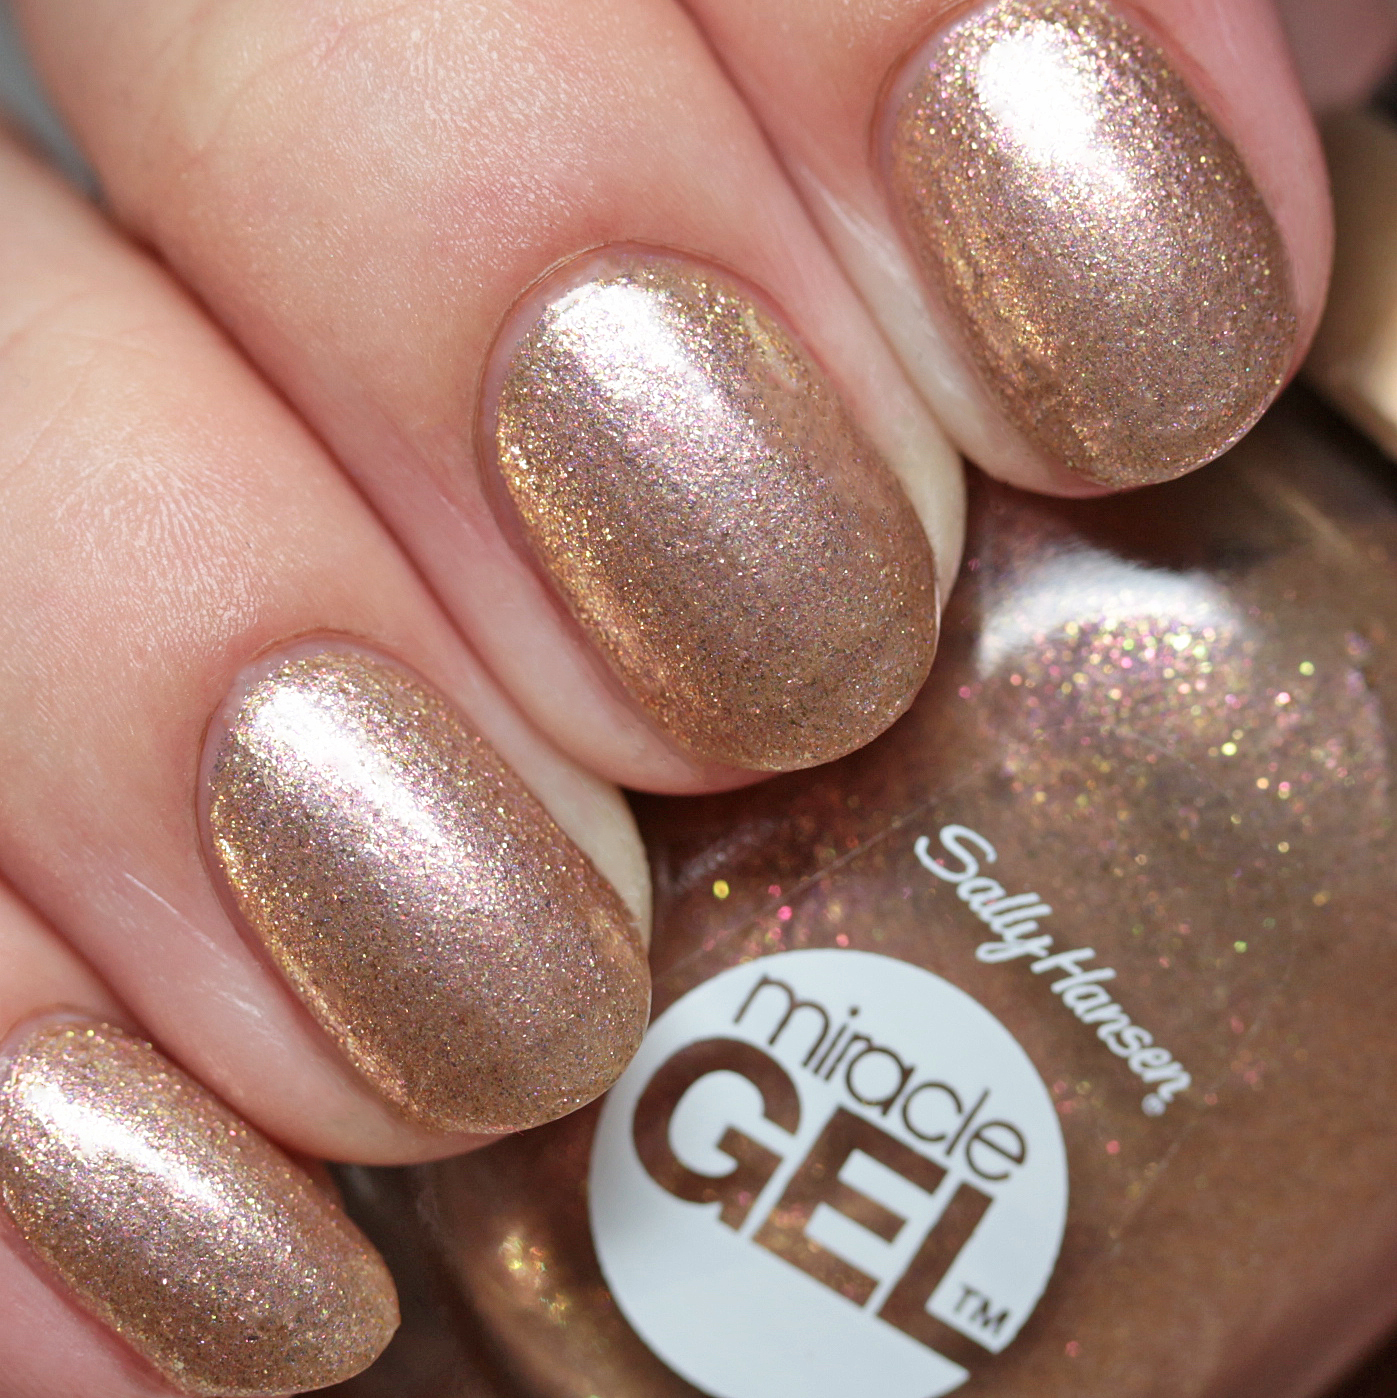 The Polished Hippy: Sally Hansen Miracle Gel Golden Glow Swatches and Review